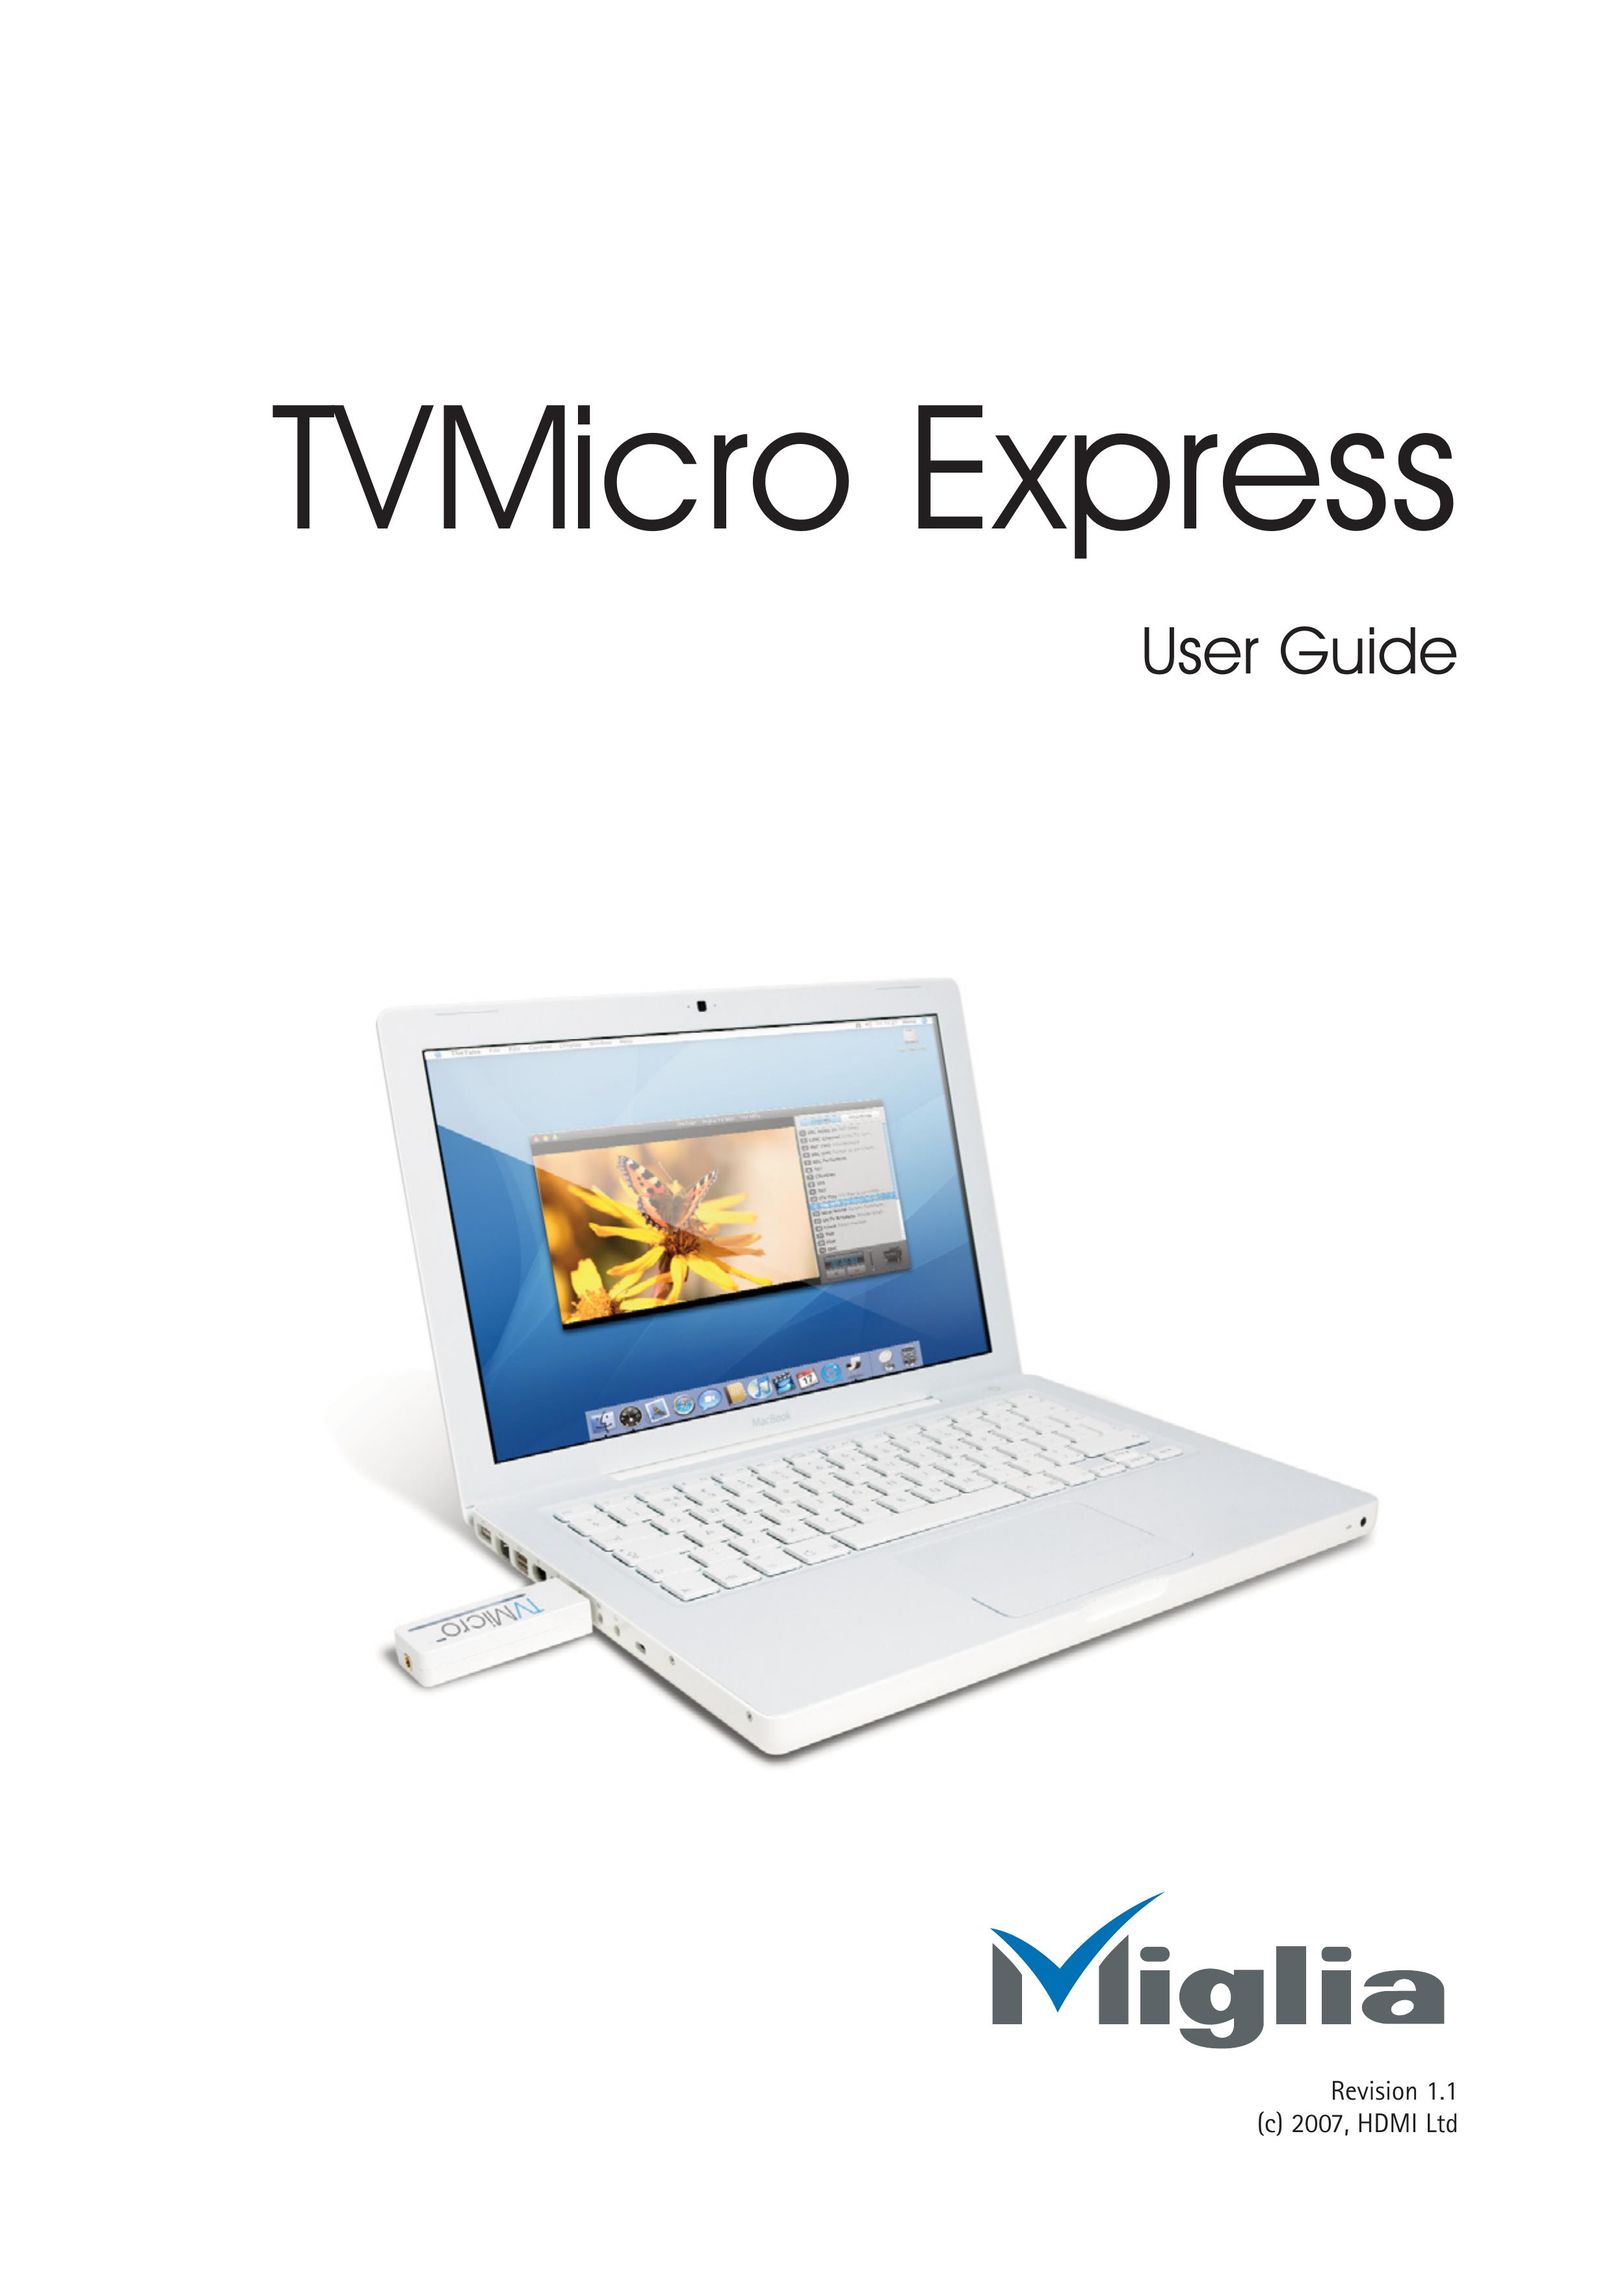 Miglia Technology TV Micro Express Adapter TV Receiver User Manual